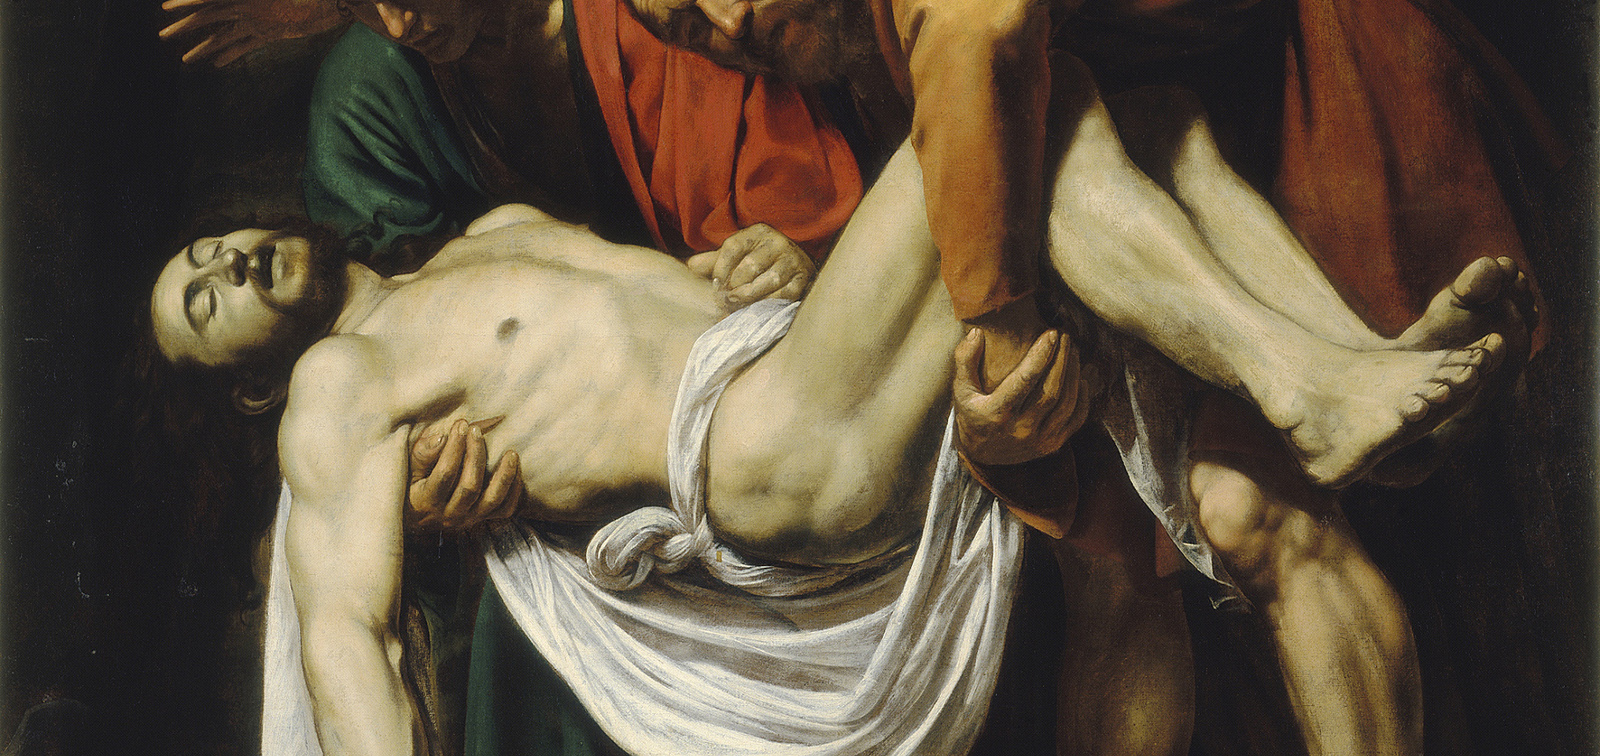 The invited work: The Entombment of Christ, Caravaggio